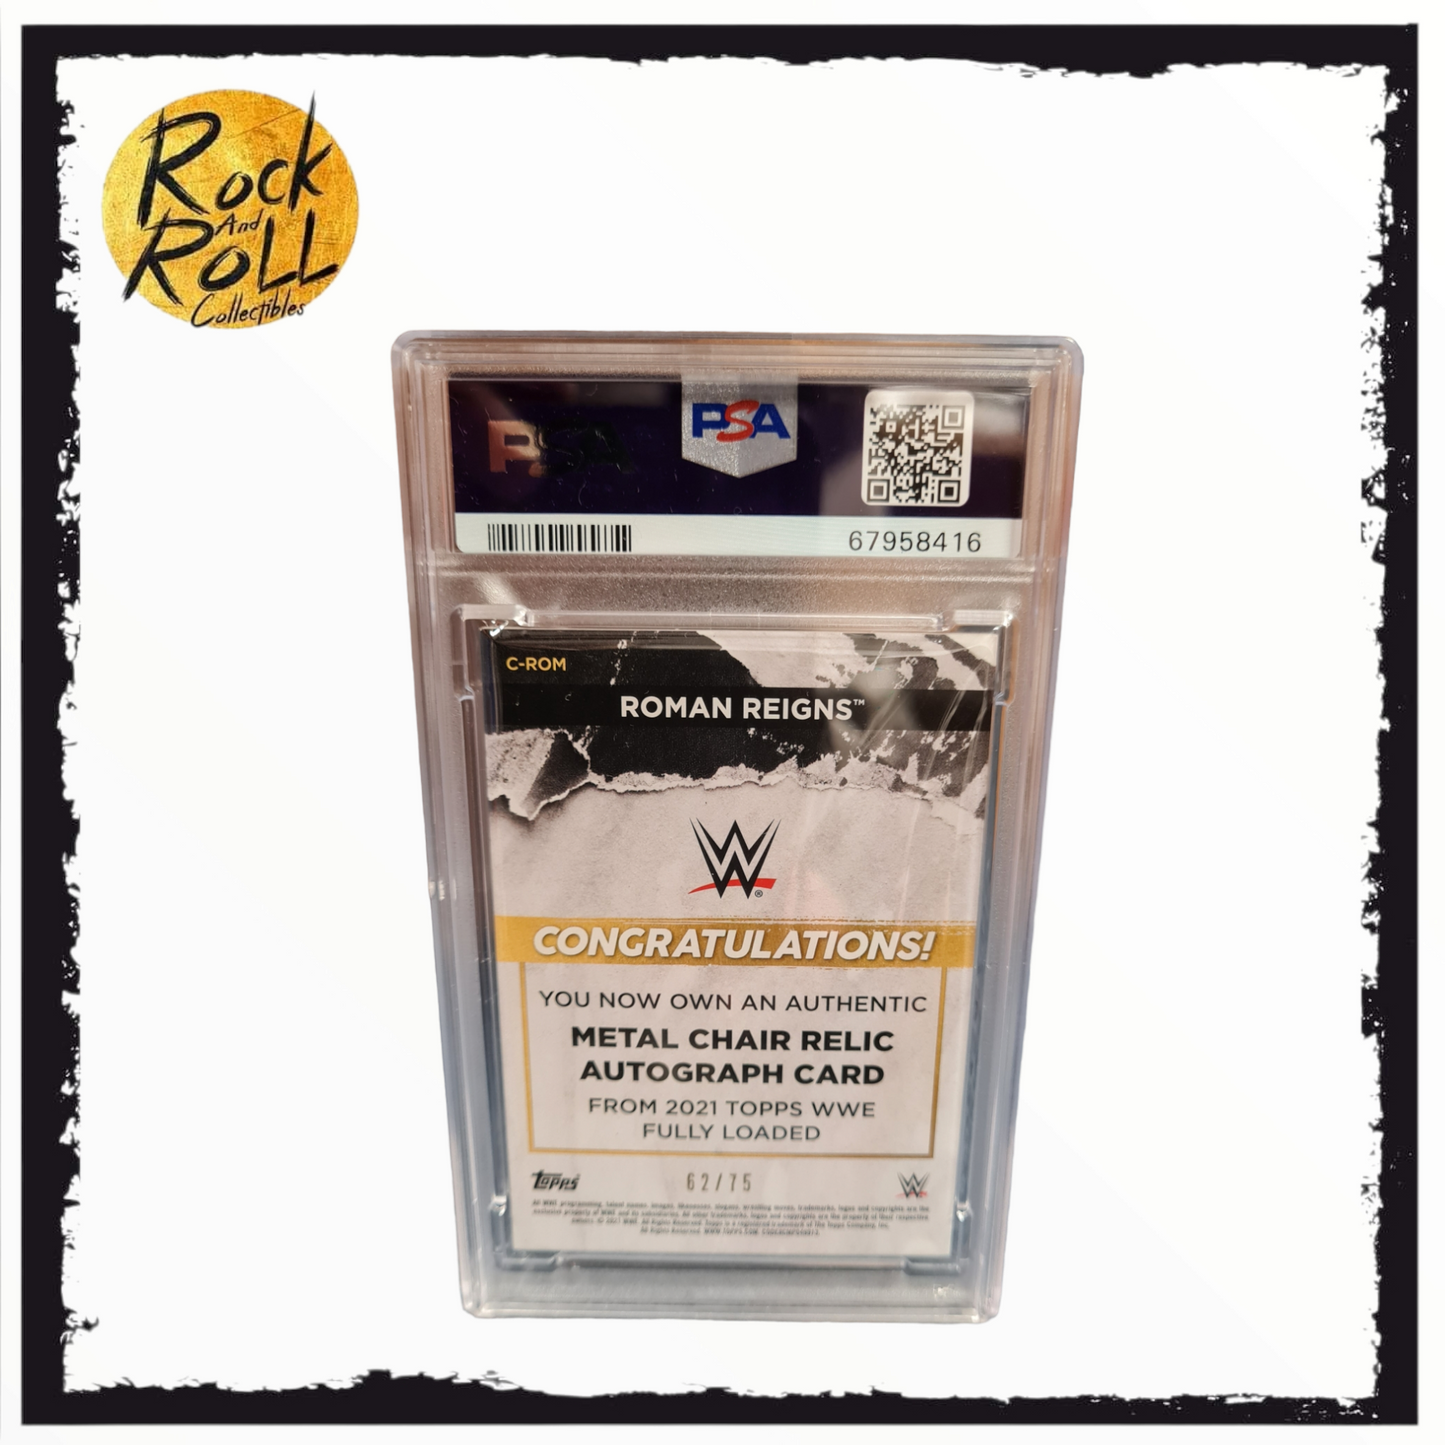 WWE 2021 Topps Fully Loaded Roman Reigns Auto Chair Relic Card 62/75 #CROM - PSA MINT 9 / AUTO 10